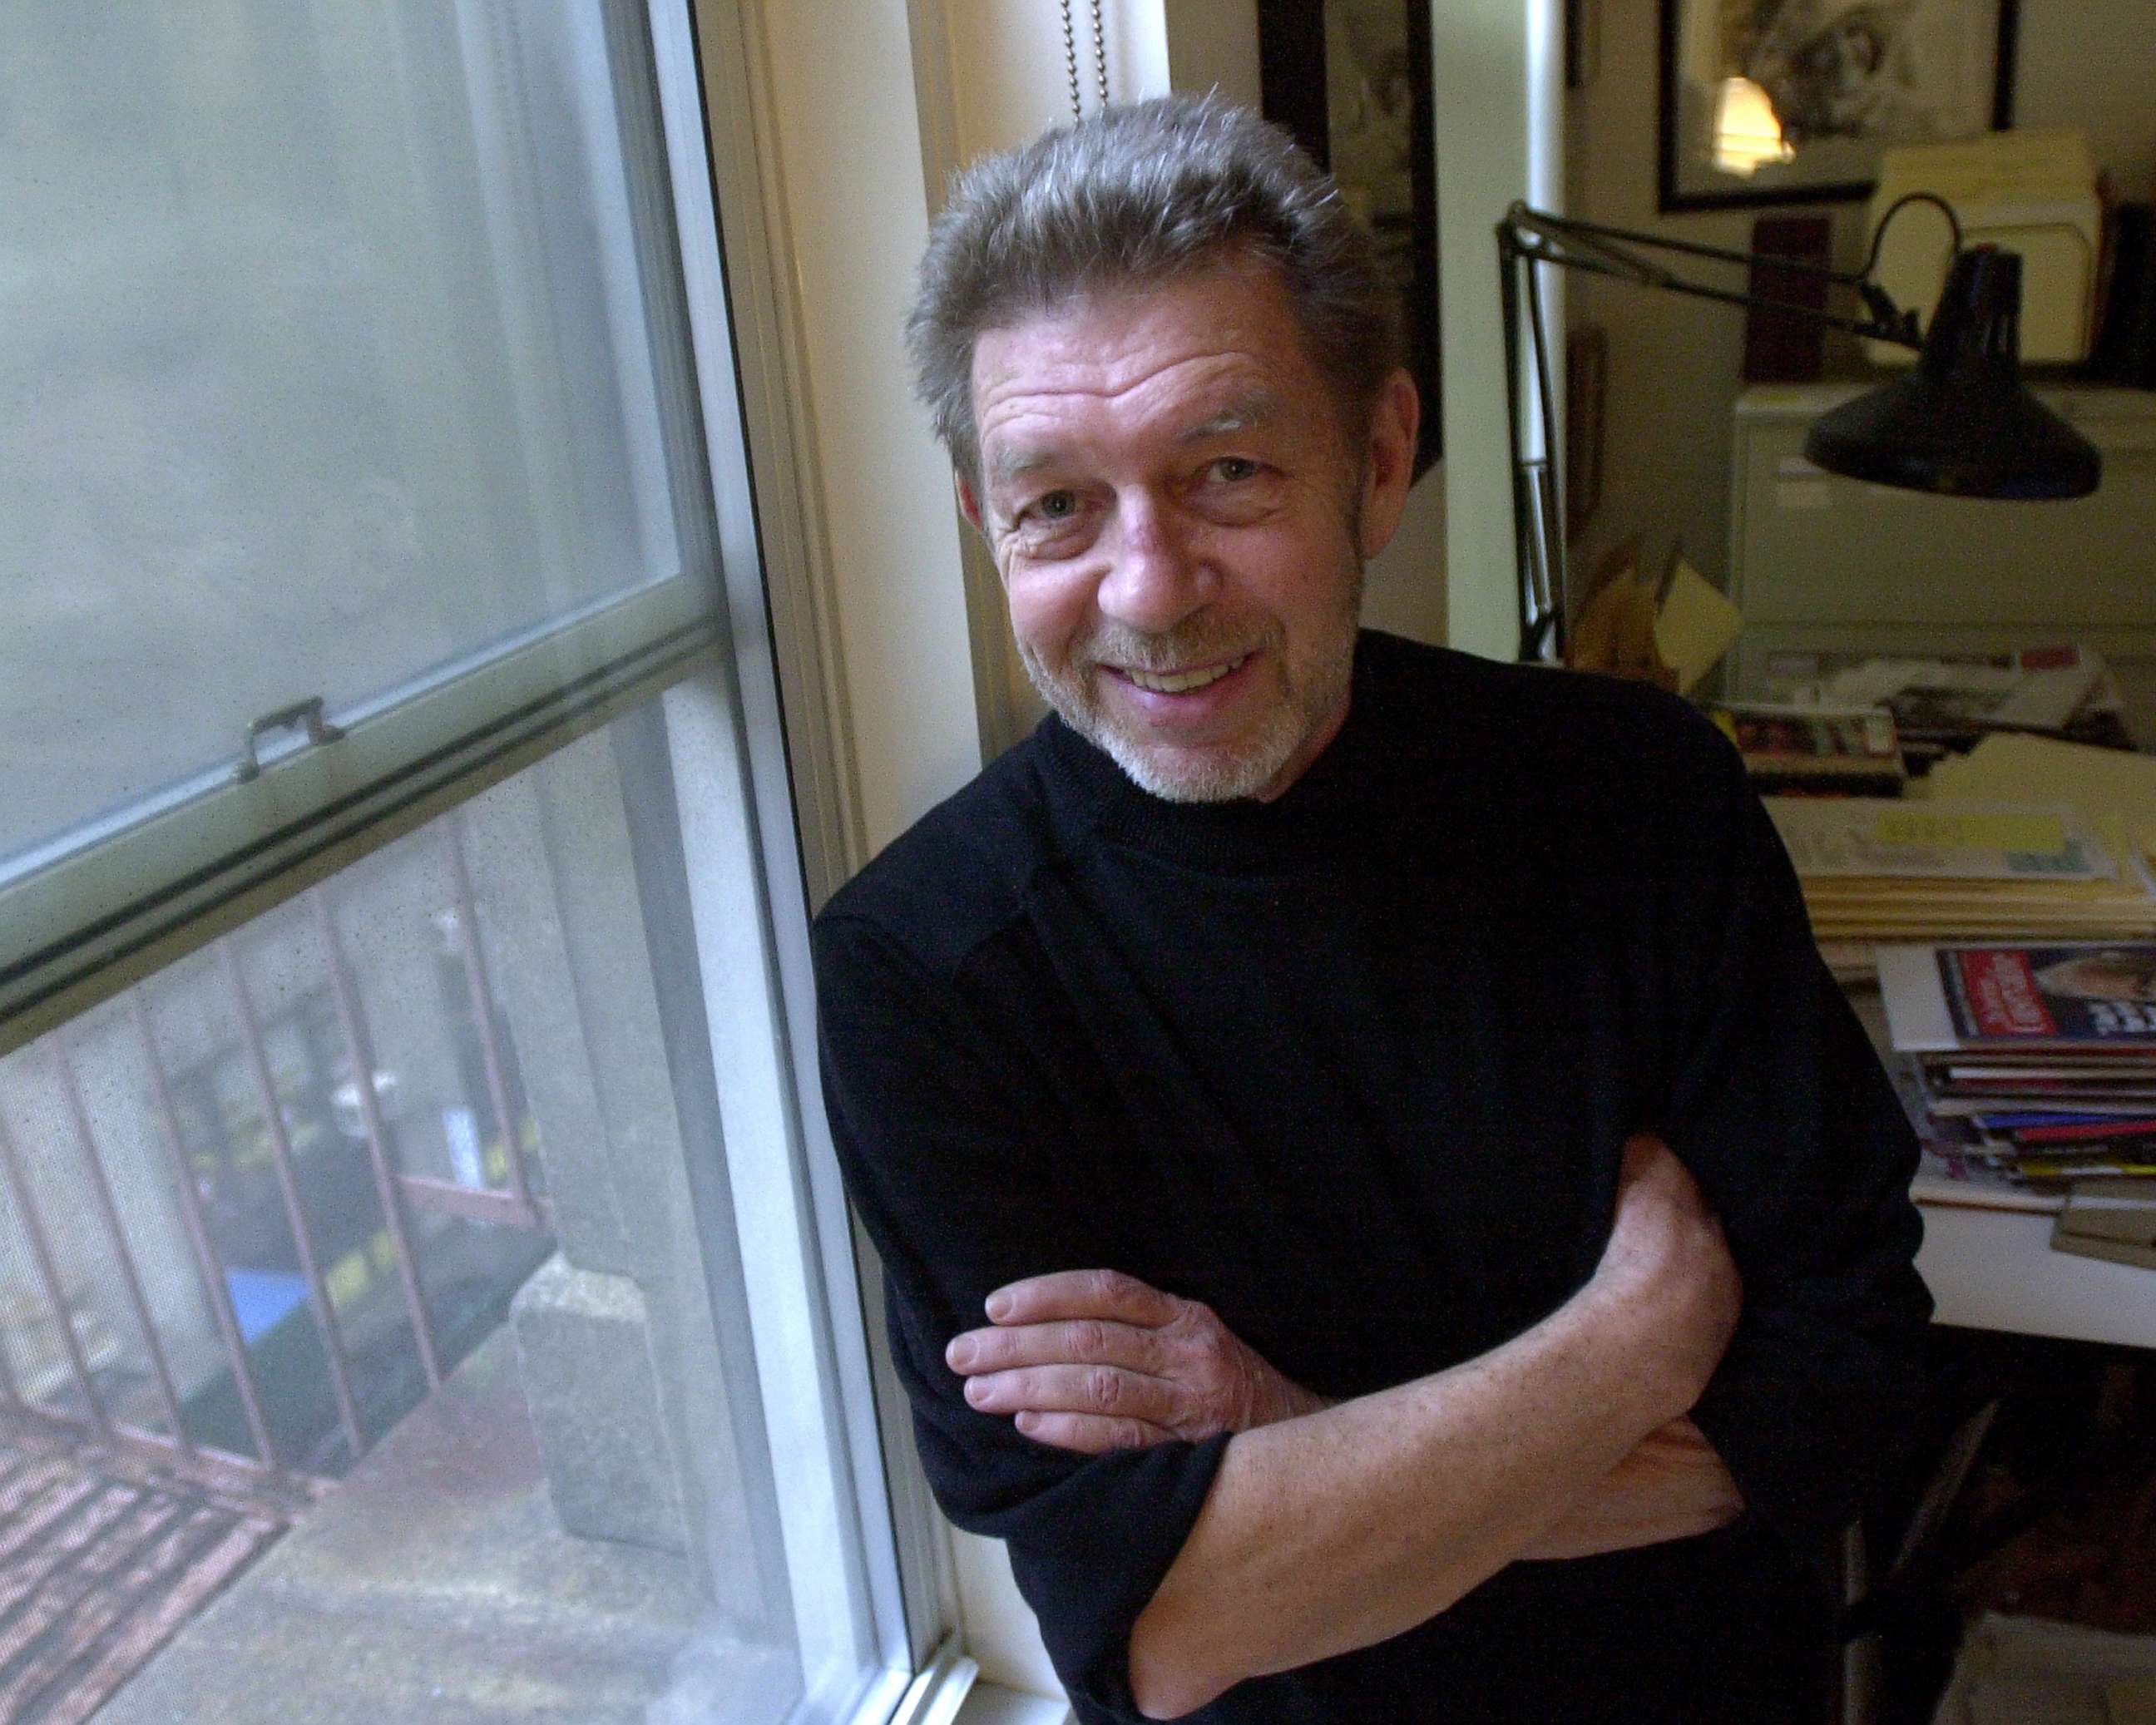 PHOTO: In this Dec. 20, 2002, file photo, columnist and best-selling author Pete Hamill is shown.